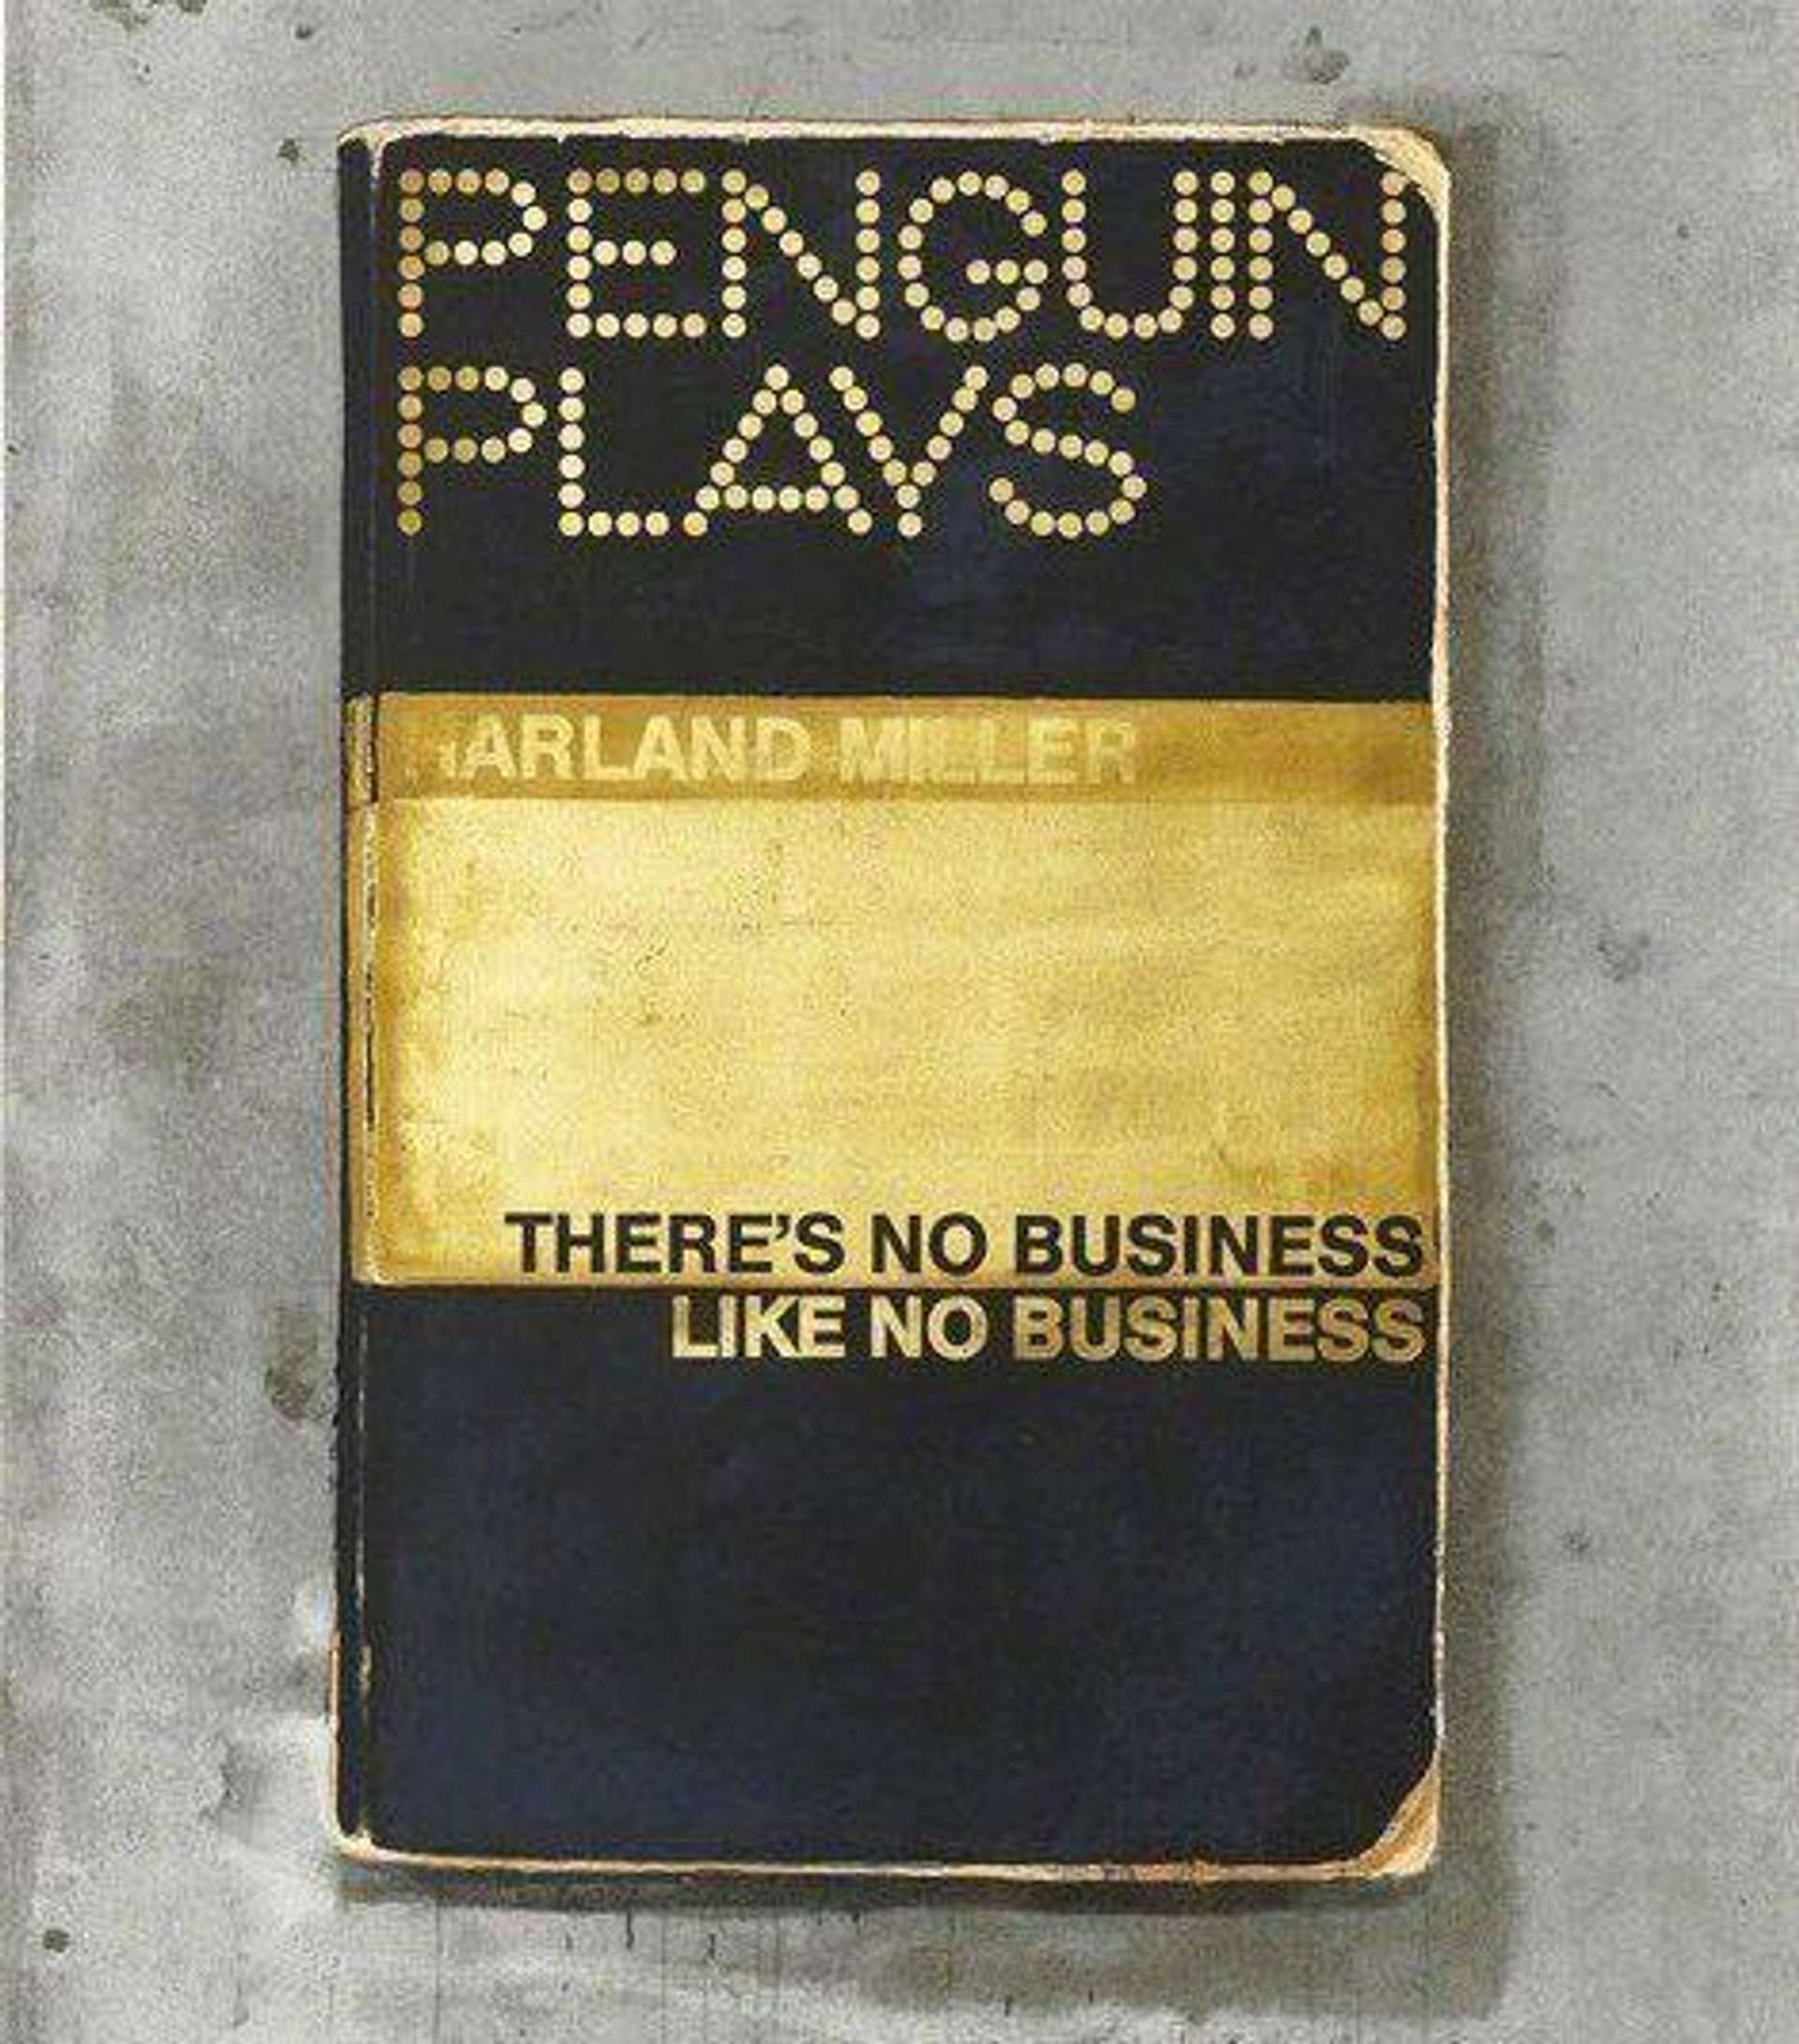 A Seller’s Guide To Harland Miller